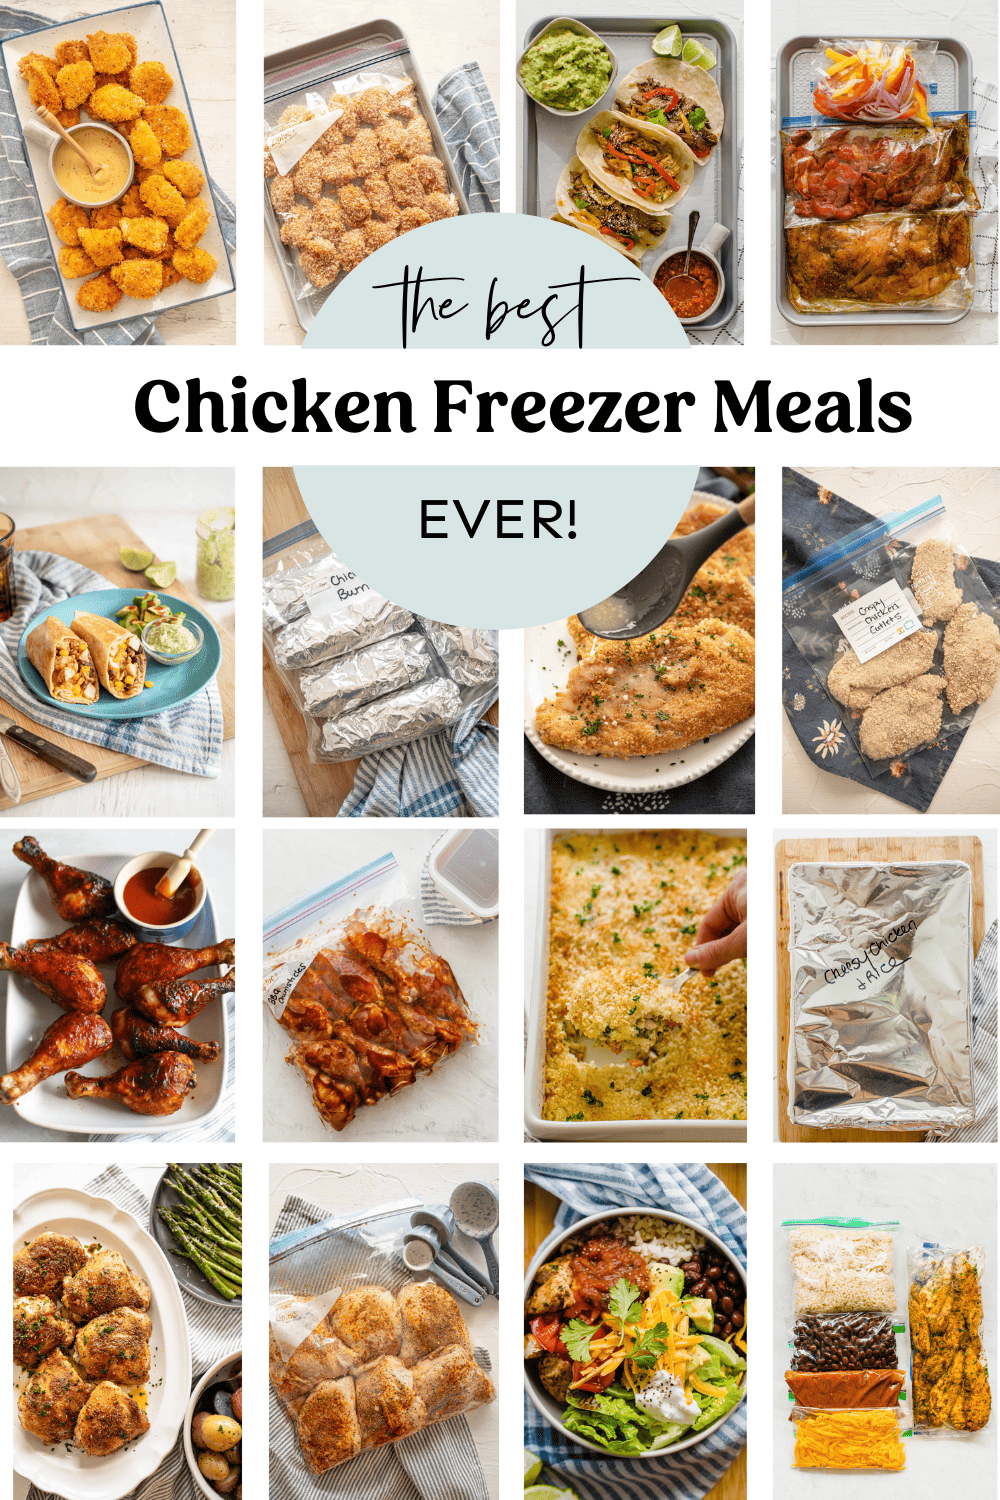 Collage of chicken freezer meals that are completed dishes side by side with freezer meal versions.